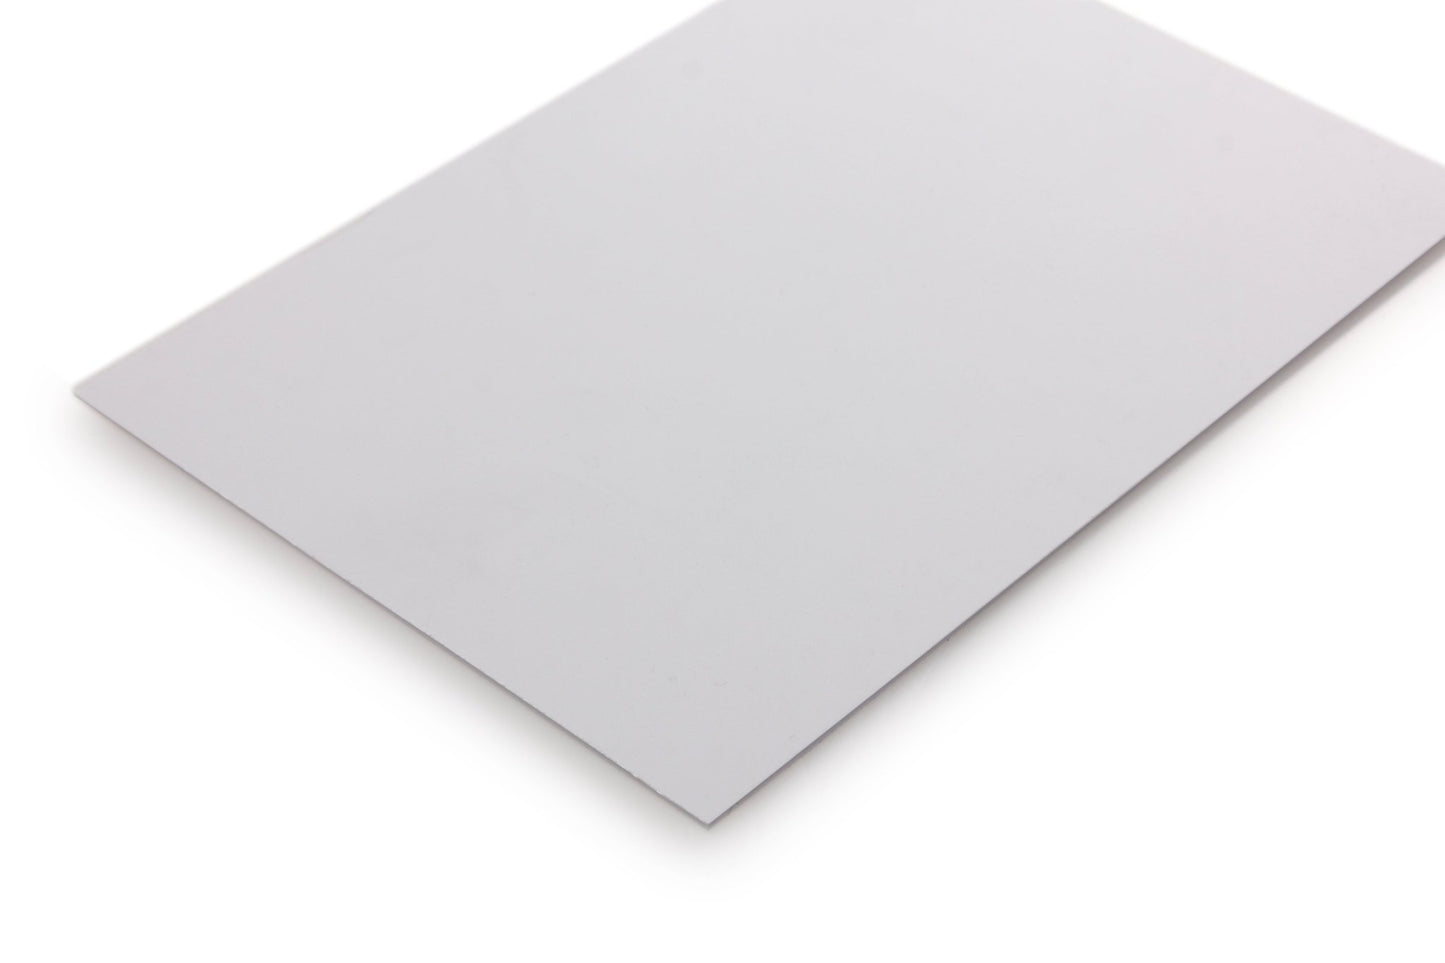 PS (Polystyreen) 1.0 mm wit - Lasersheets